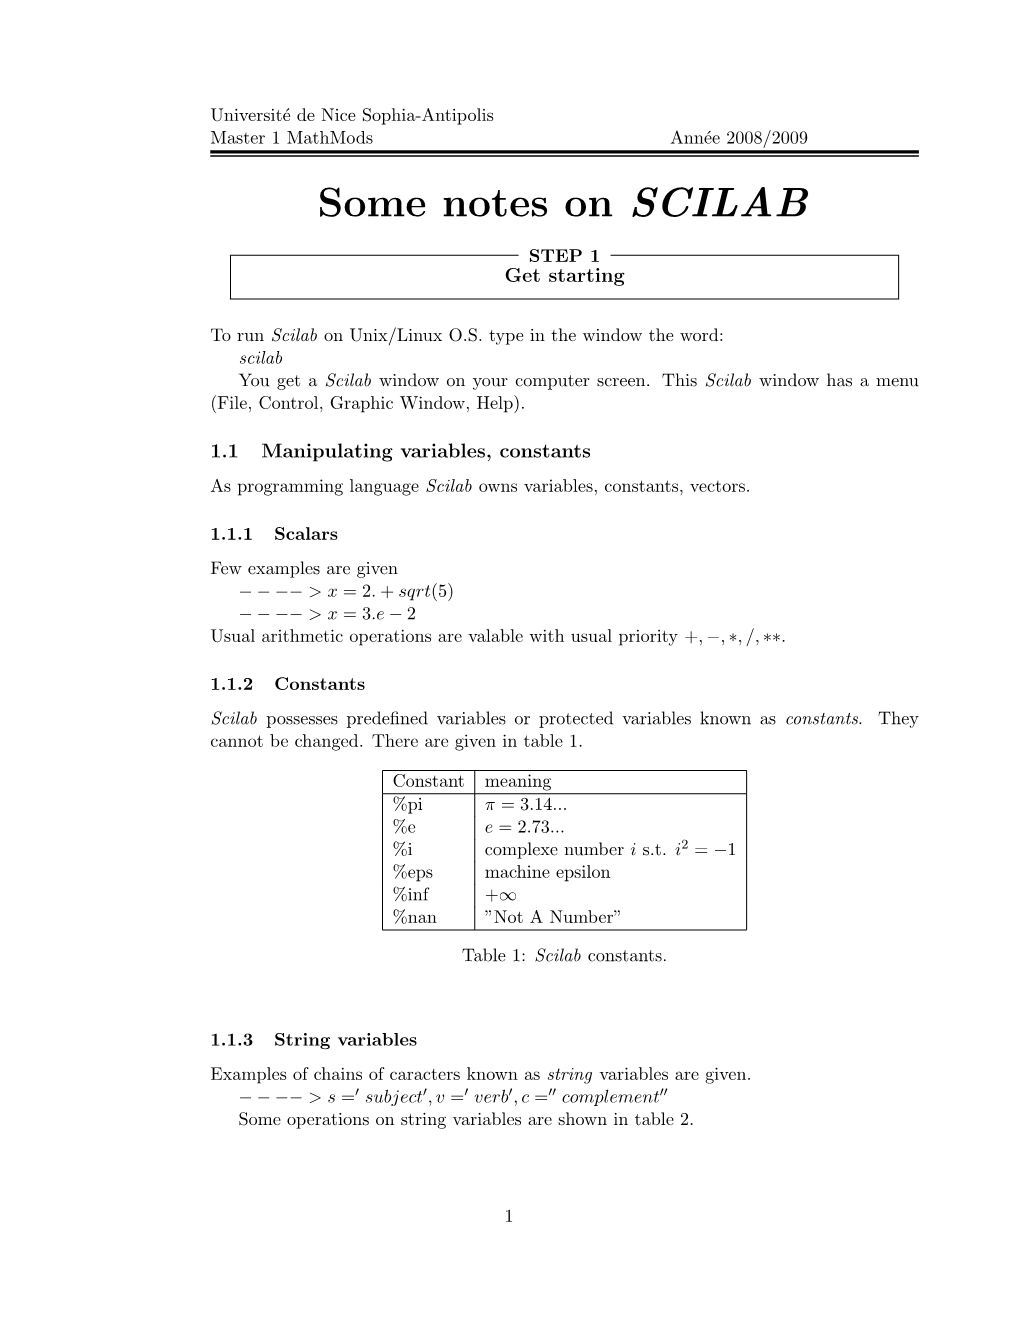 Some Notes on SCILAB